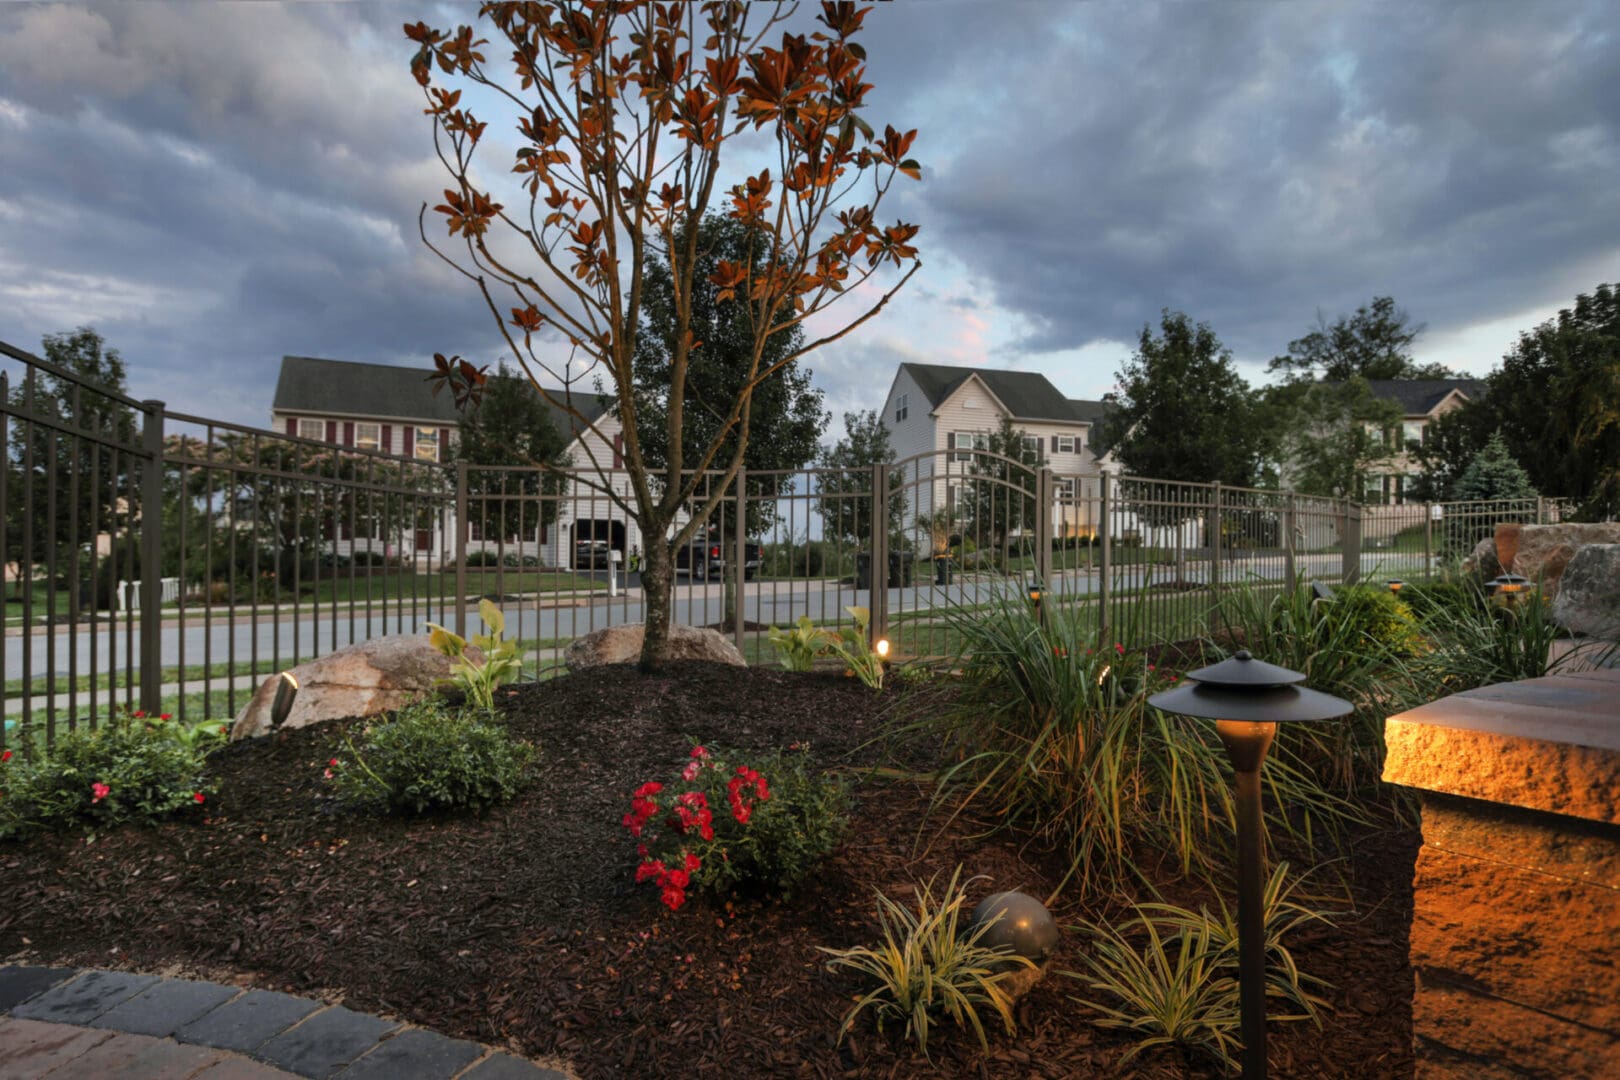 A landscaped yard with trees and shrubs in the foreground, enhanced with outdoor lighting for a serene ambiance.